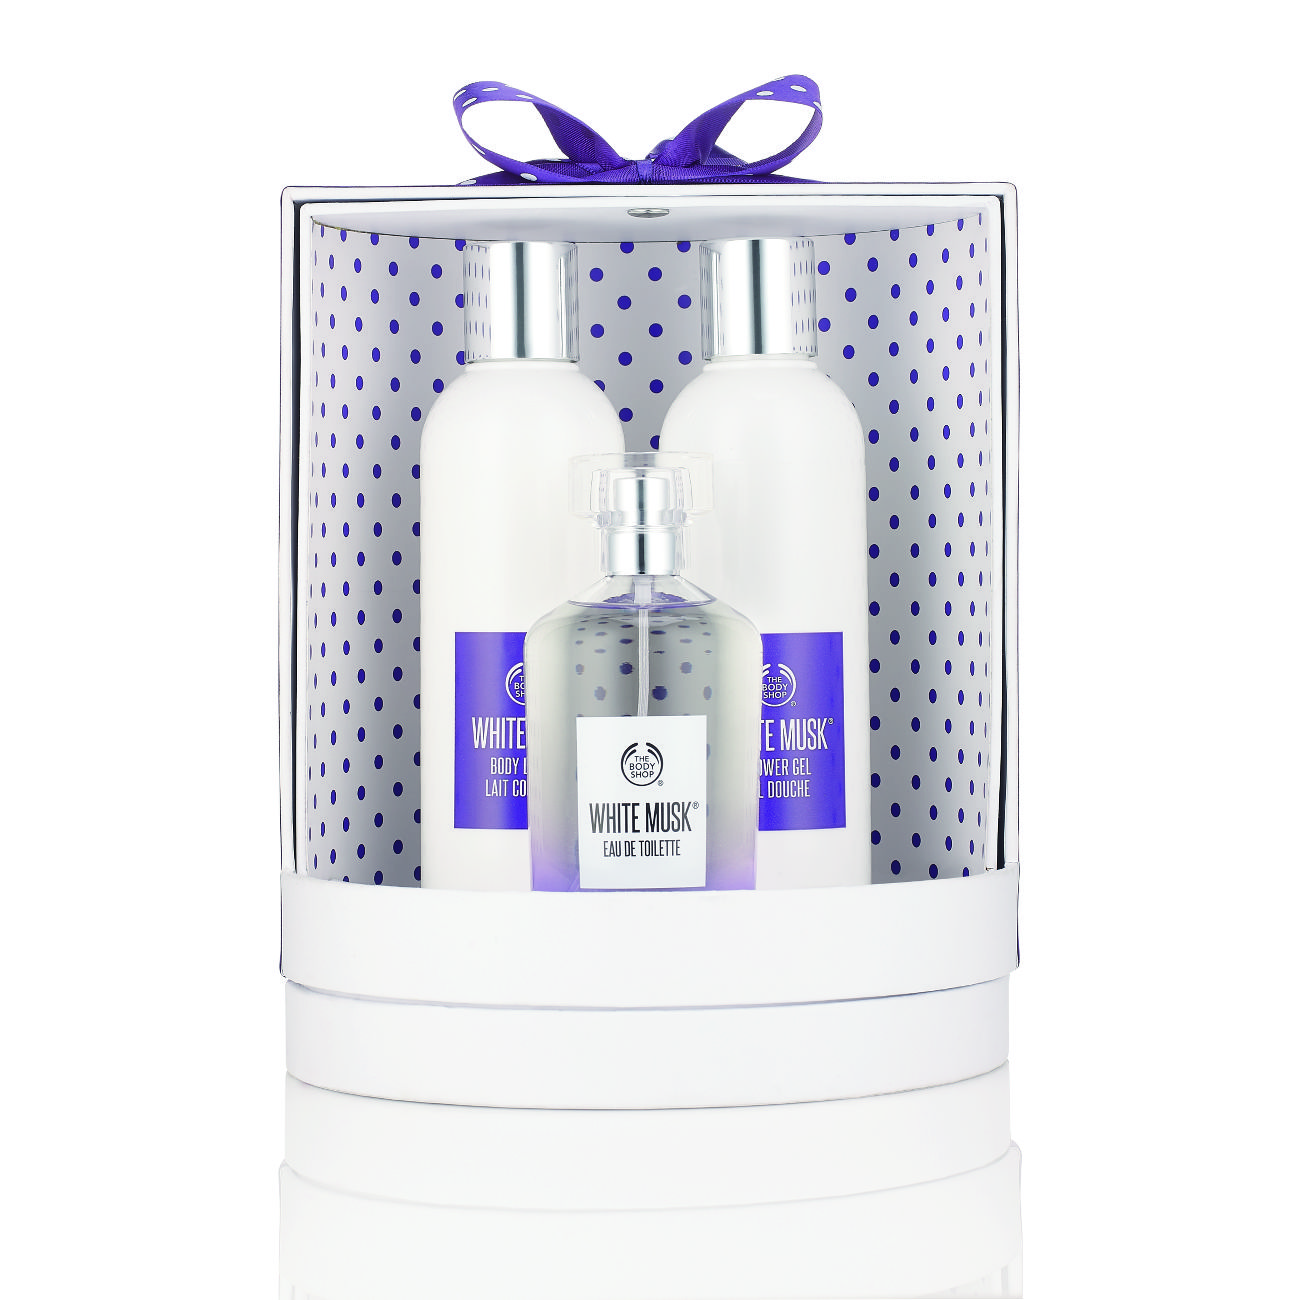 Wrapped up and ready to go: White Musk Eau de Toilette 100ml Gift Set